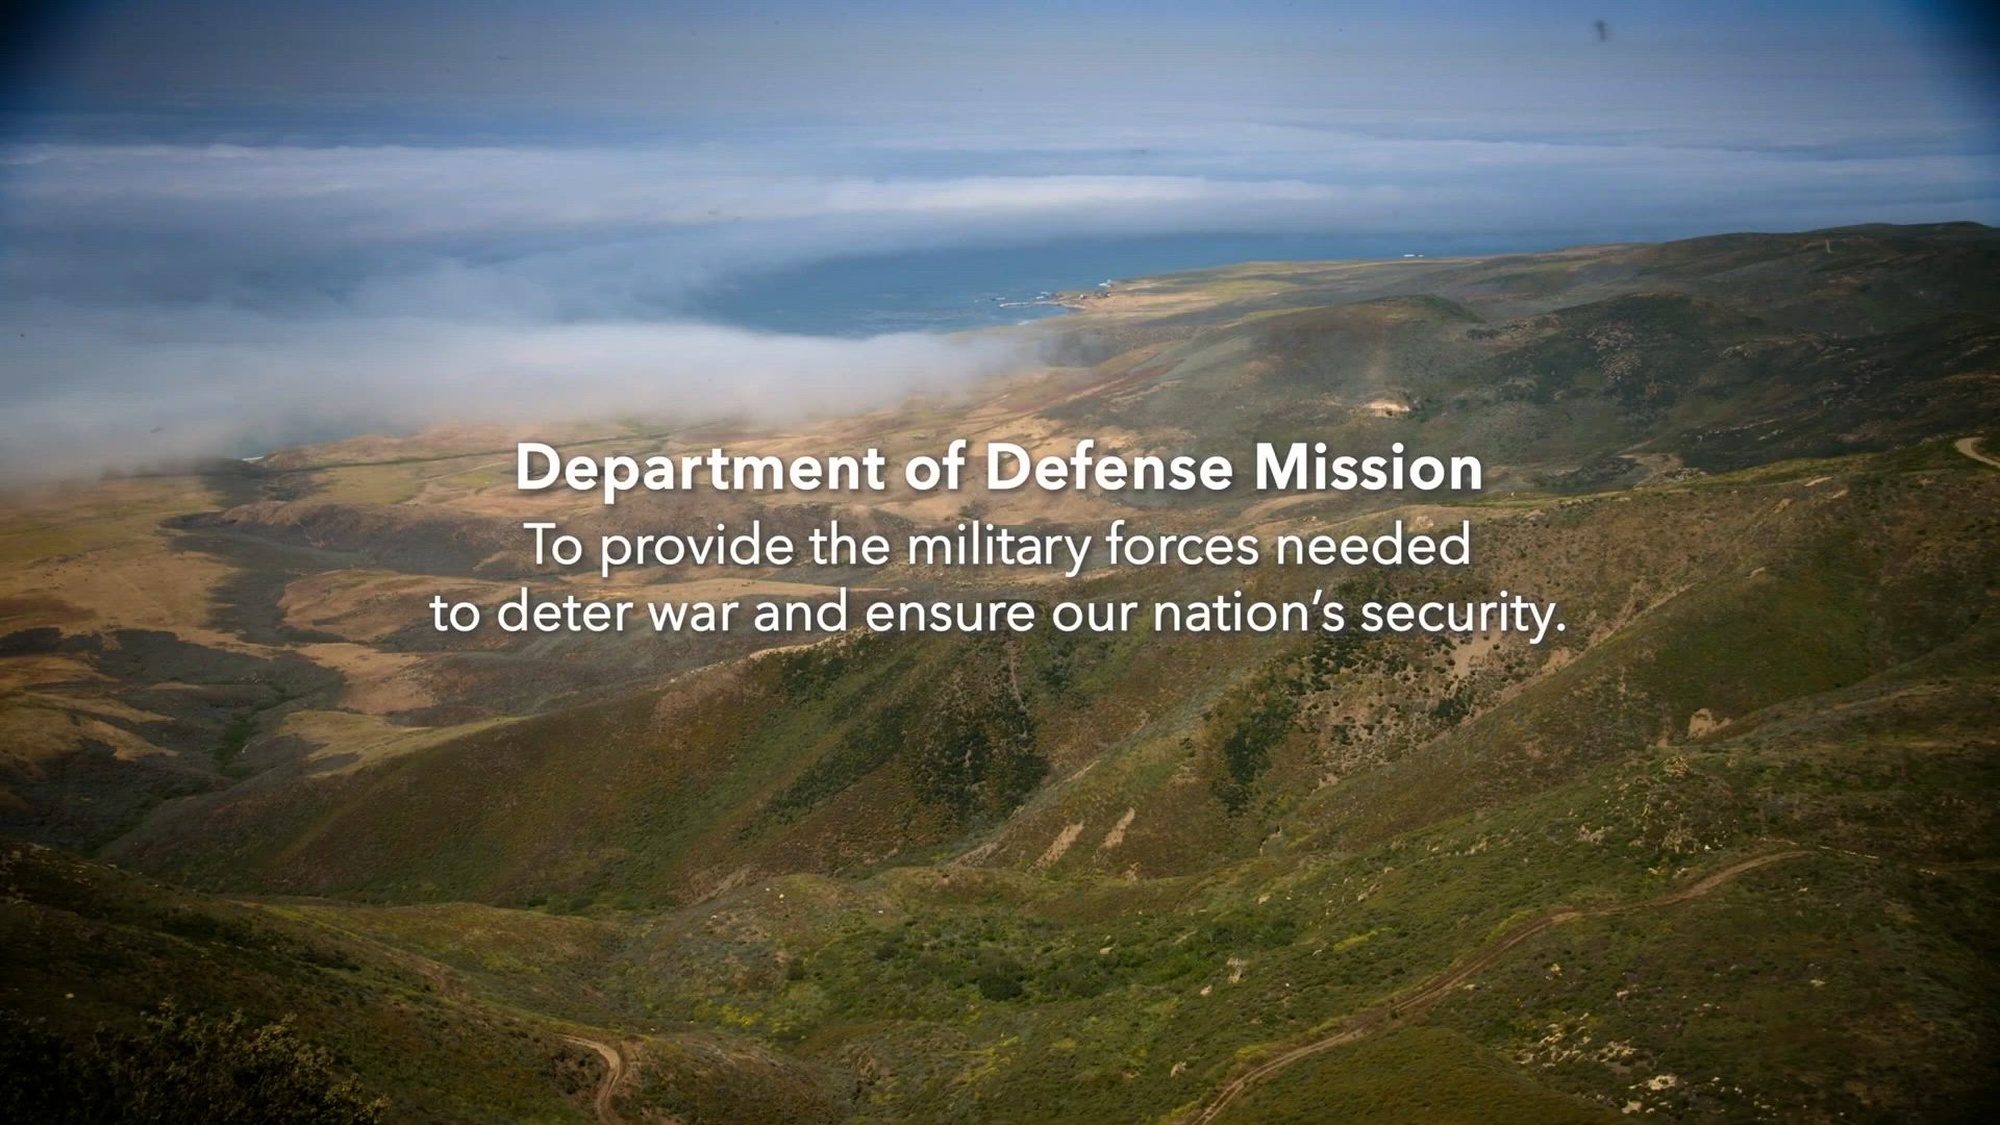 The Office of the Assistant Secretary of Defense for Energy, Installations and Environment announces the release of Boots on the Ground: Saving Species, Supporting the Mission—a video that showcases the Department of Defense’s (DoD) success in maintaining its national defense and security mission, while conserving military lands and the species that call them home.